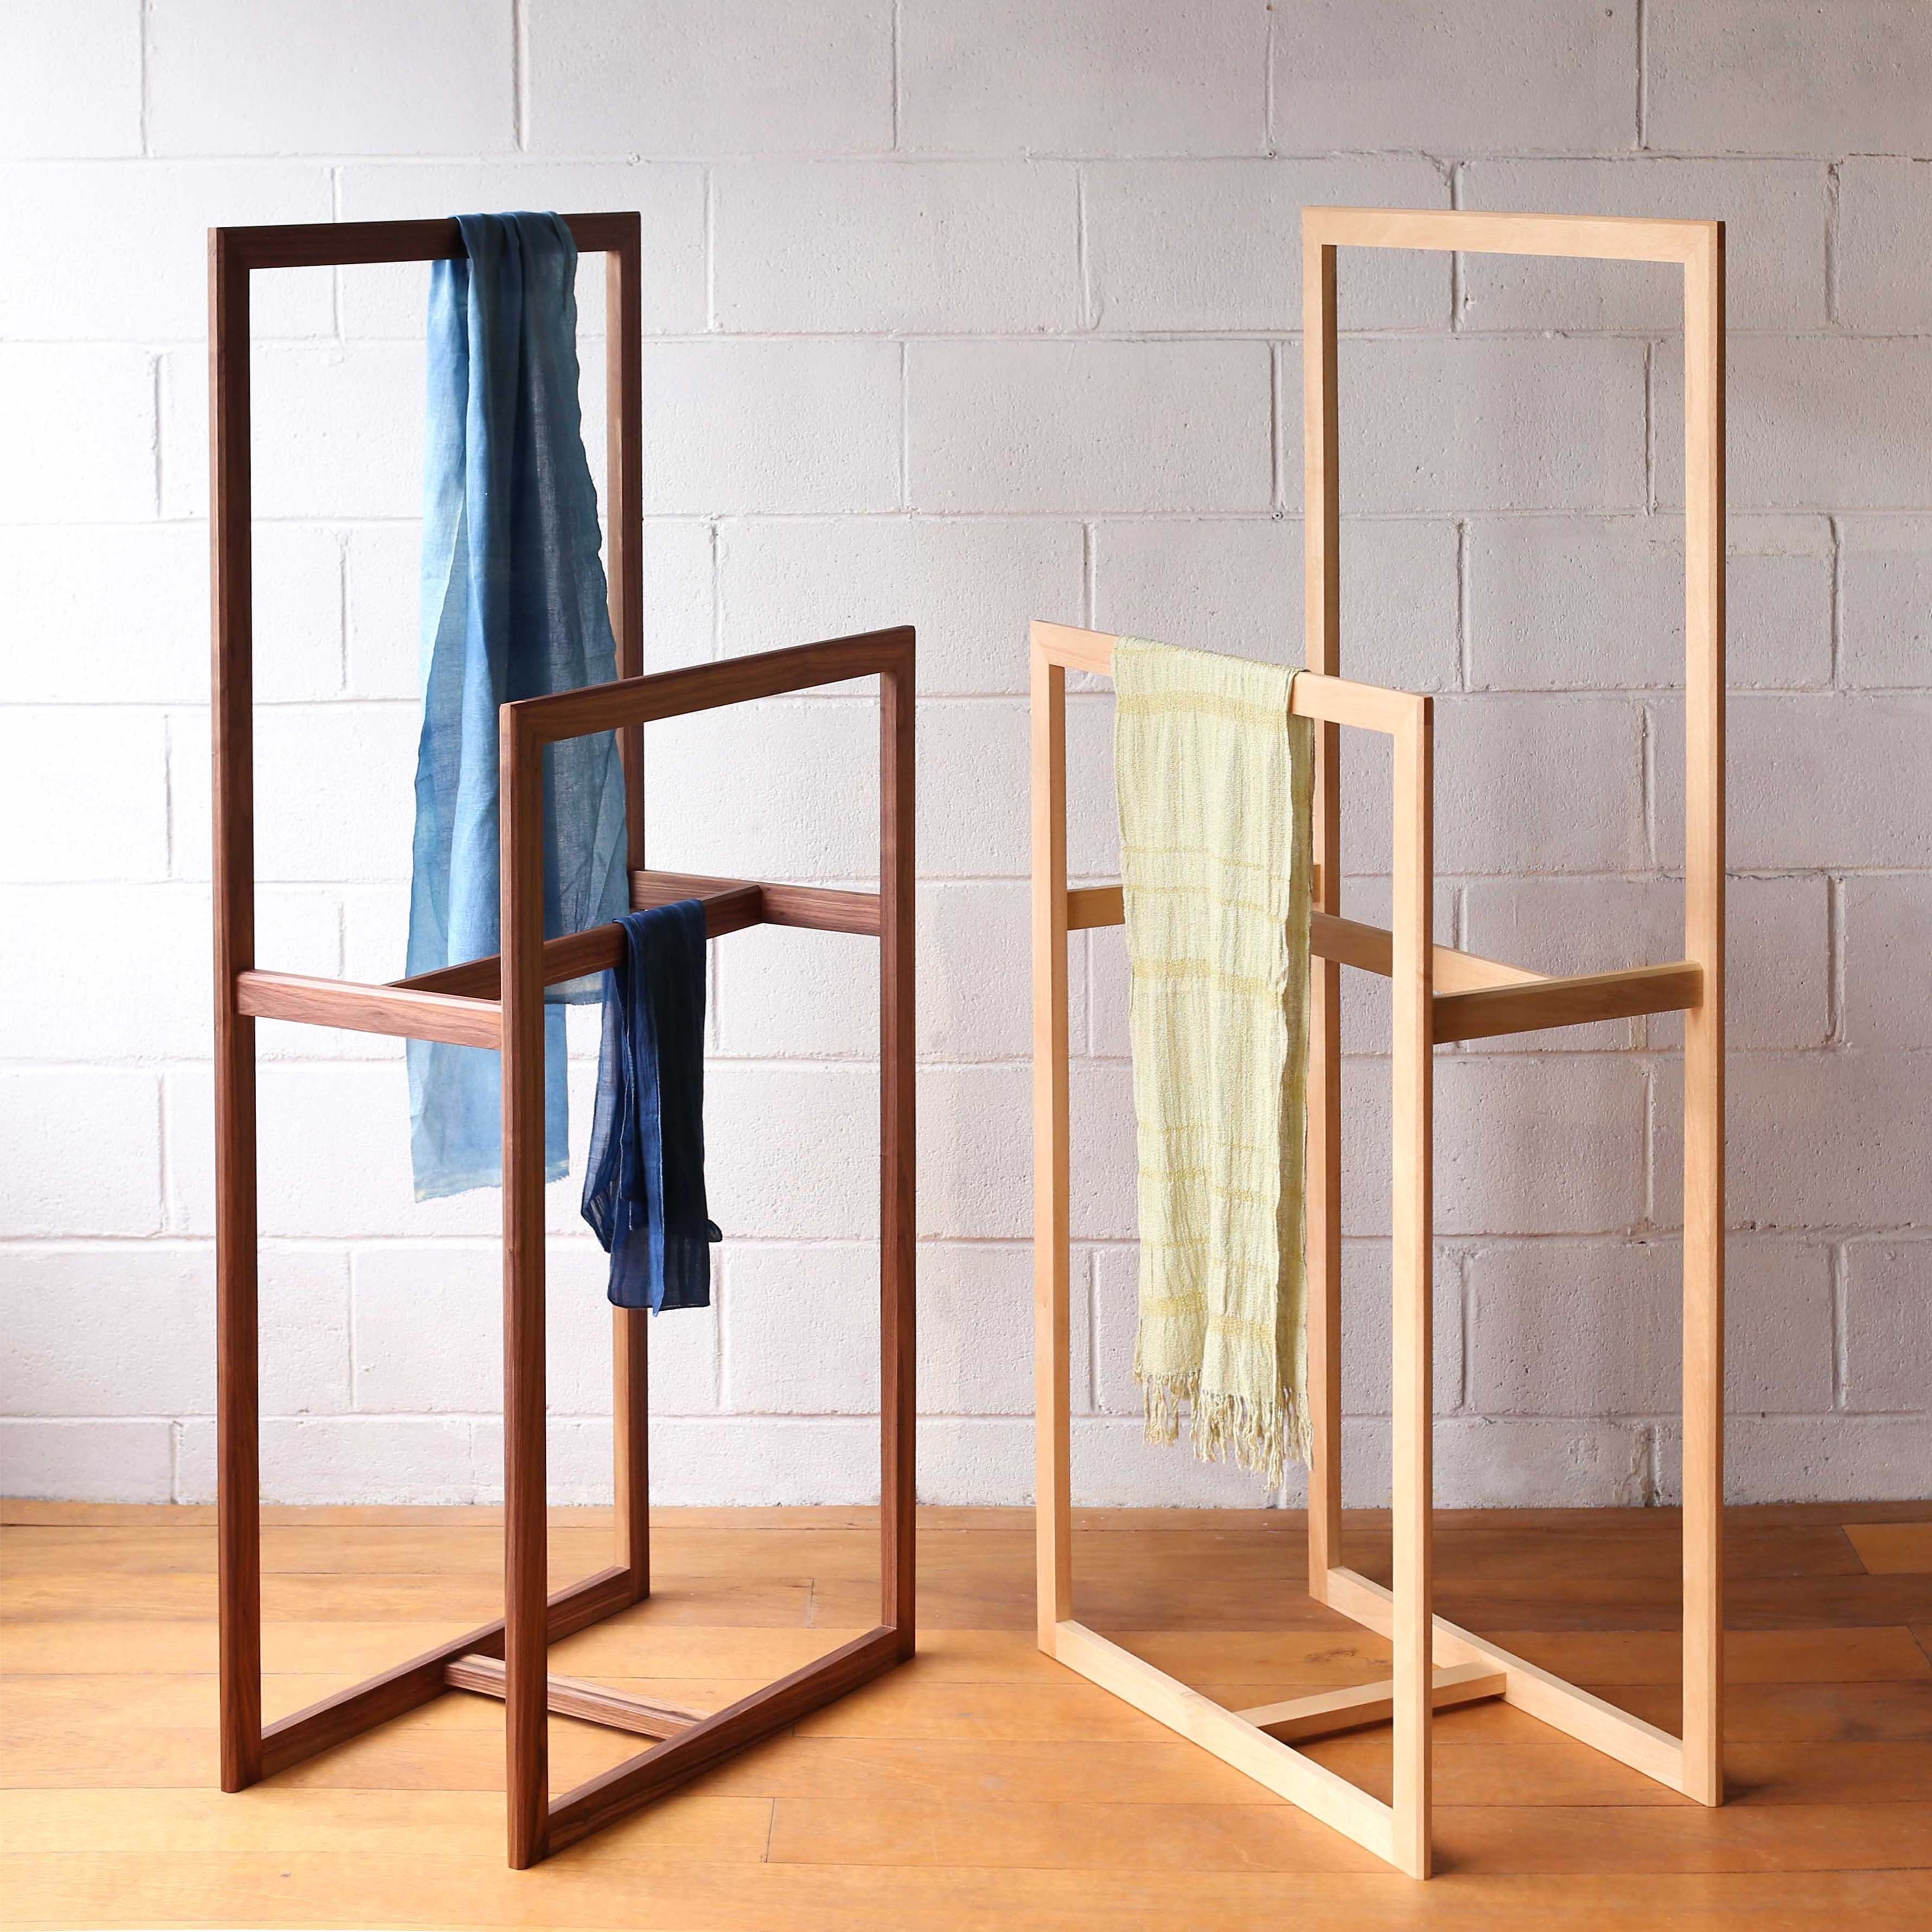 Clothes & Towel Throw Stand - Blonde -   18 home accessories Wood towel racks
 ideas